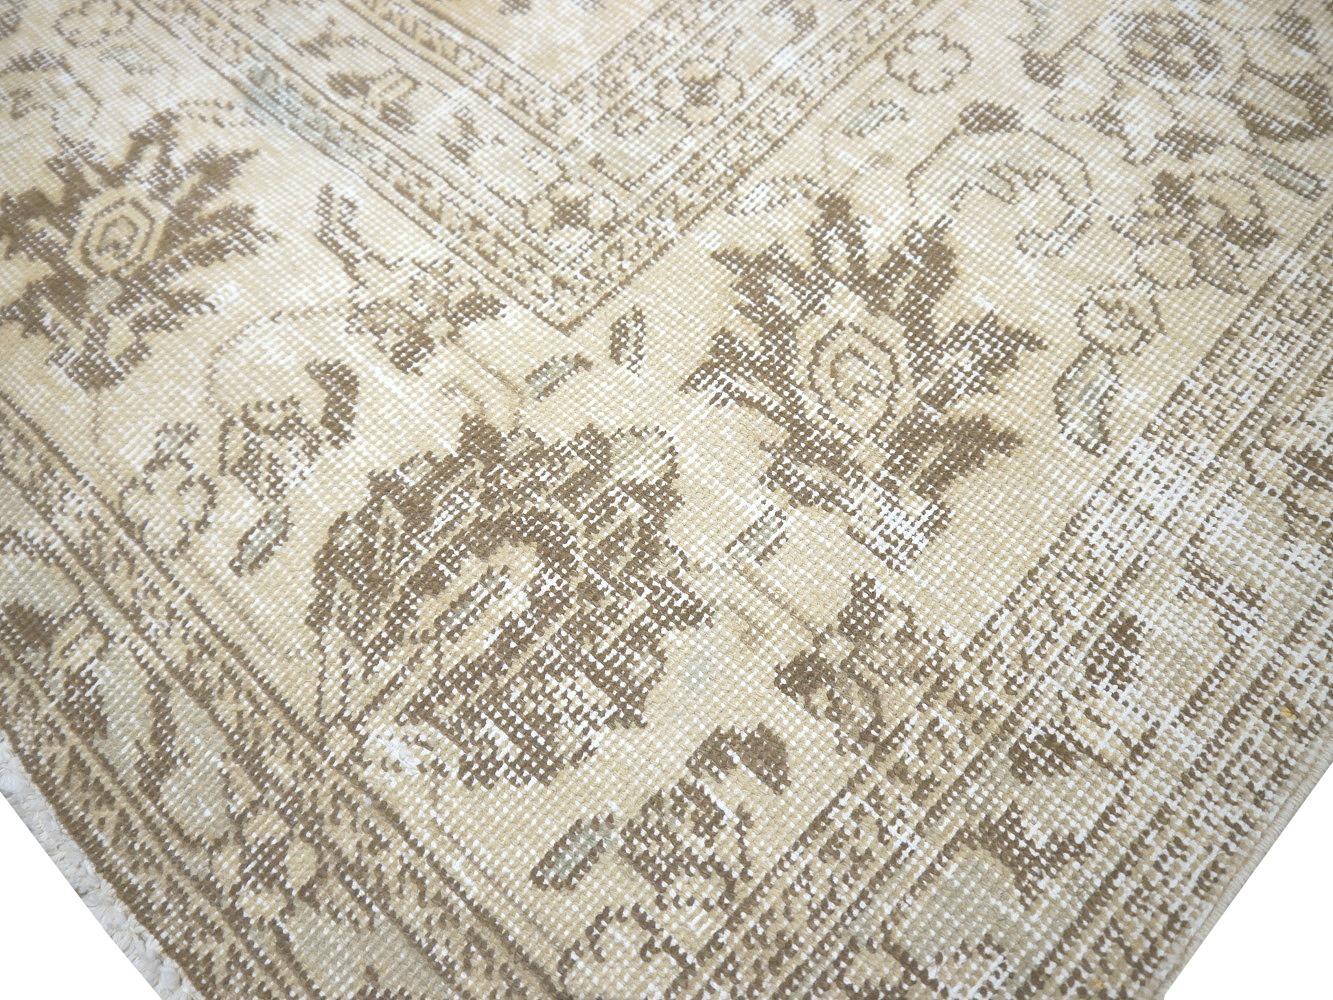 Vintage Muted Rug Classic Rug Gray Beige Brown Hand Knotted Neutral Tabriz In Good Condition For Sale In Lohr, Bavaria, DE